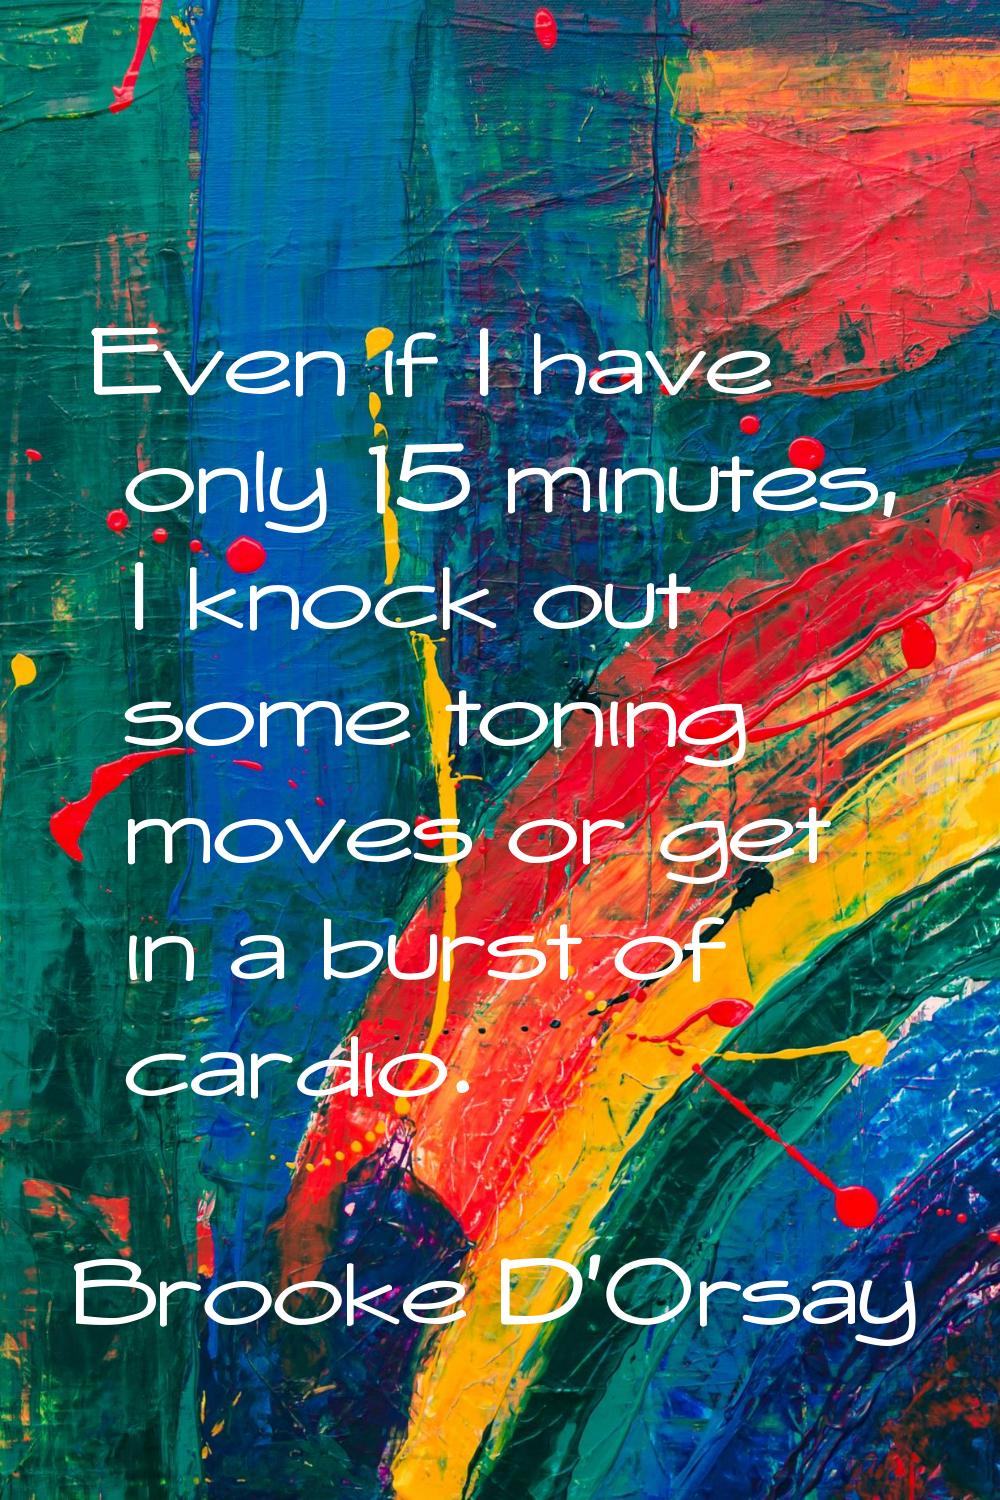 Even if I have only 15 minutes, I knock out some toning moves or get in a burst of cardio.